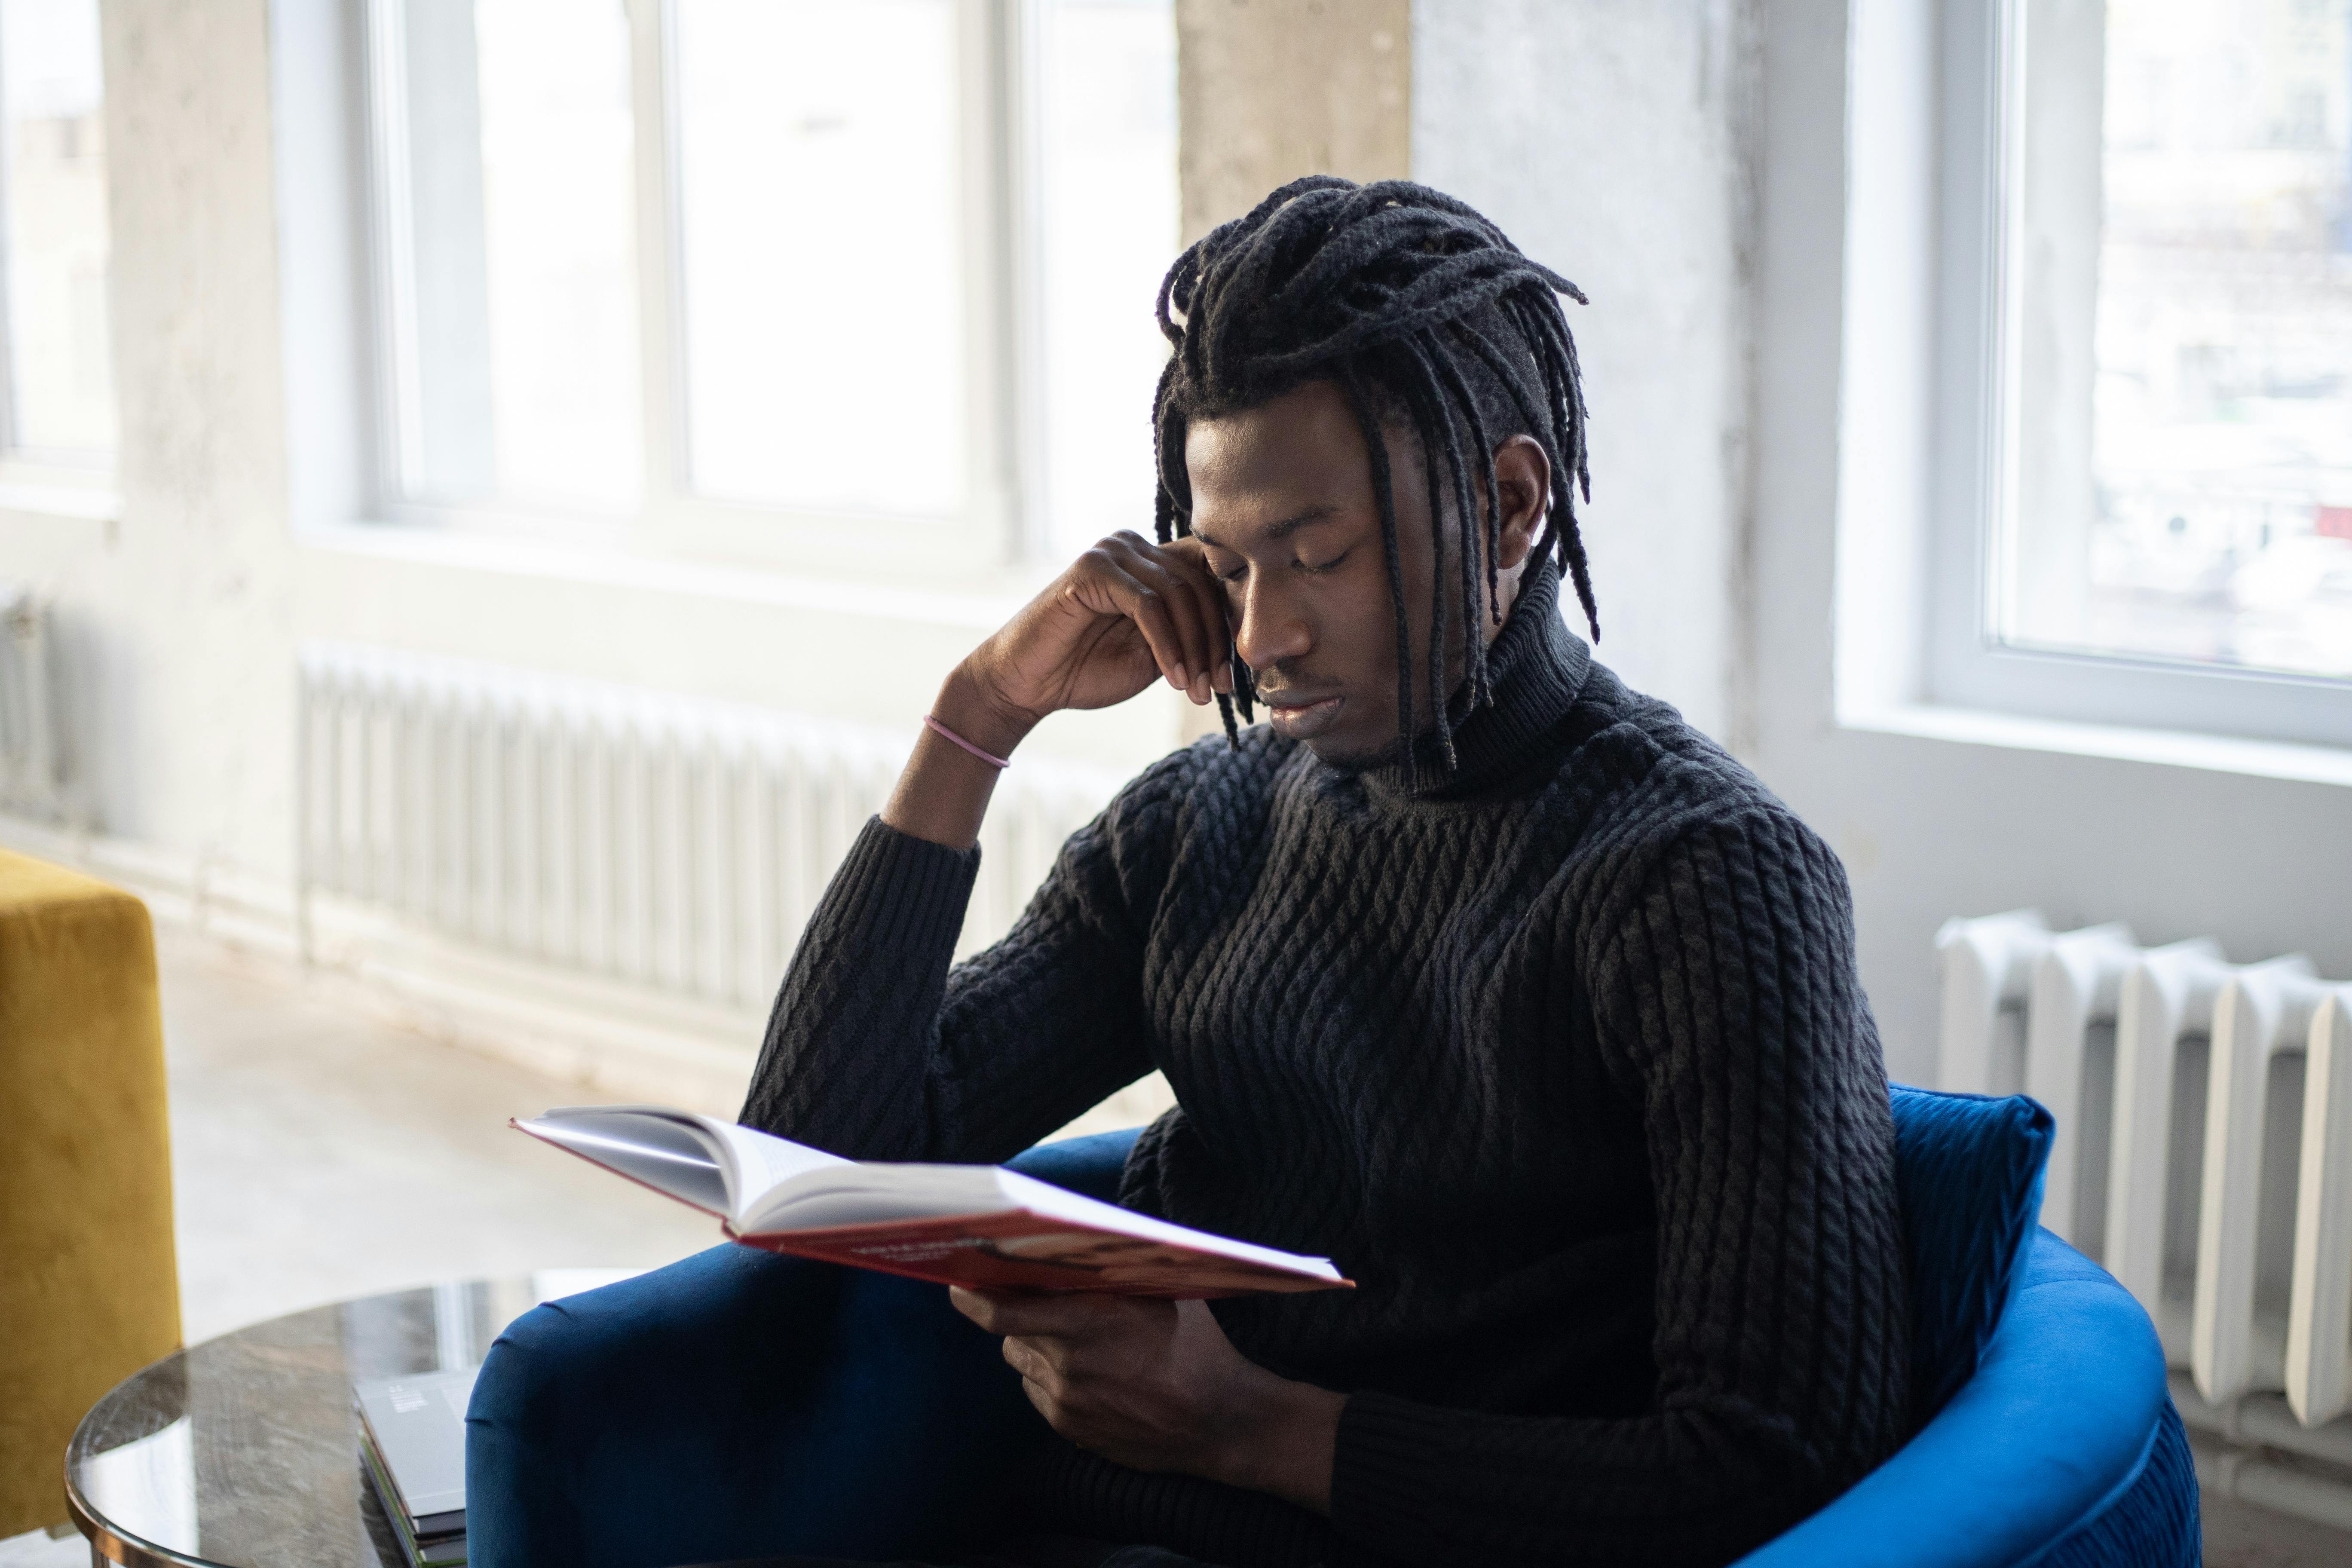 A young man in dreadlocks and a black sweater is reading a book